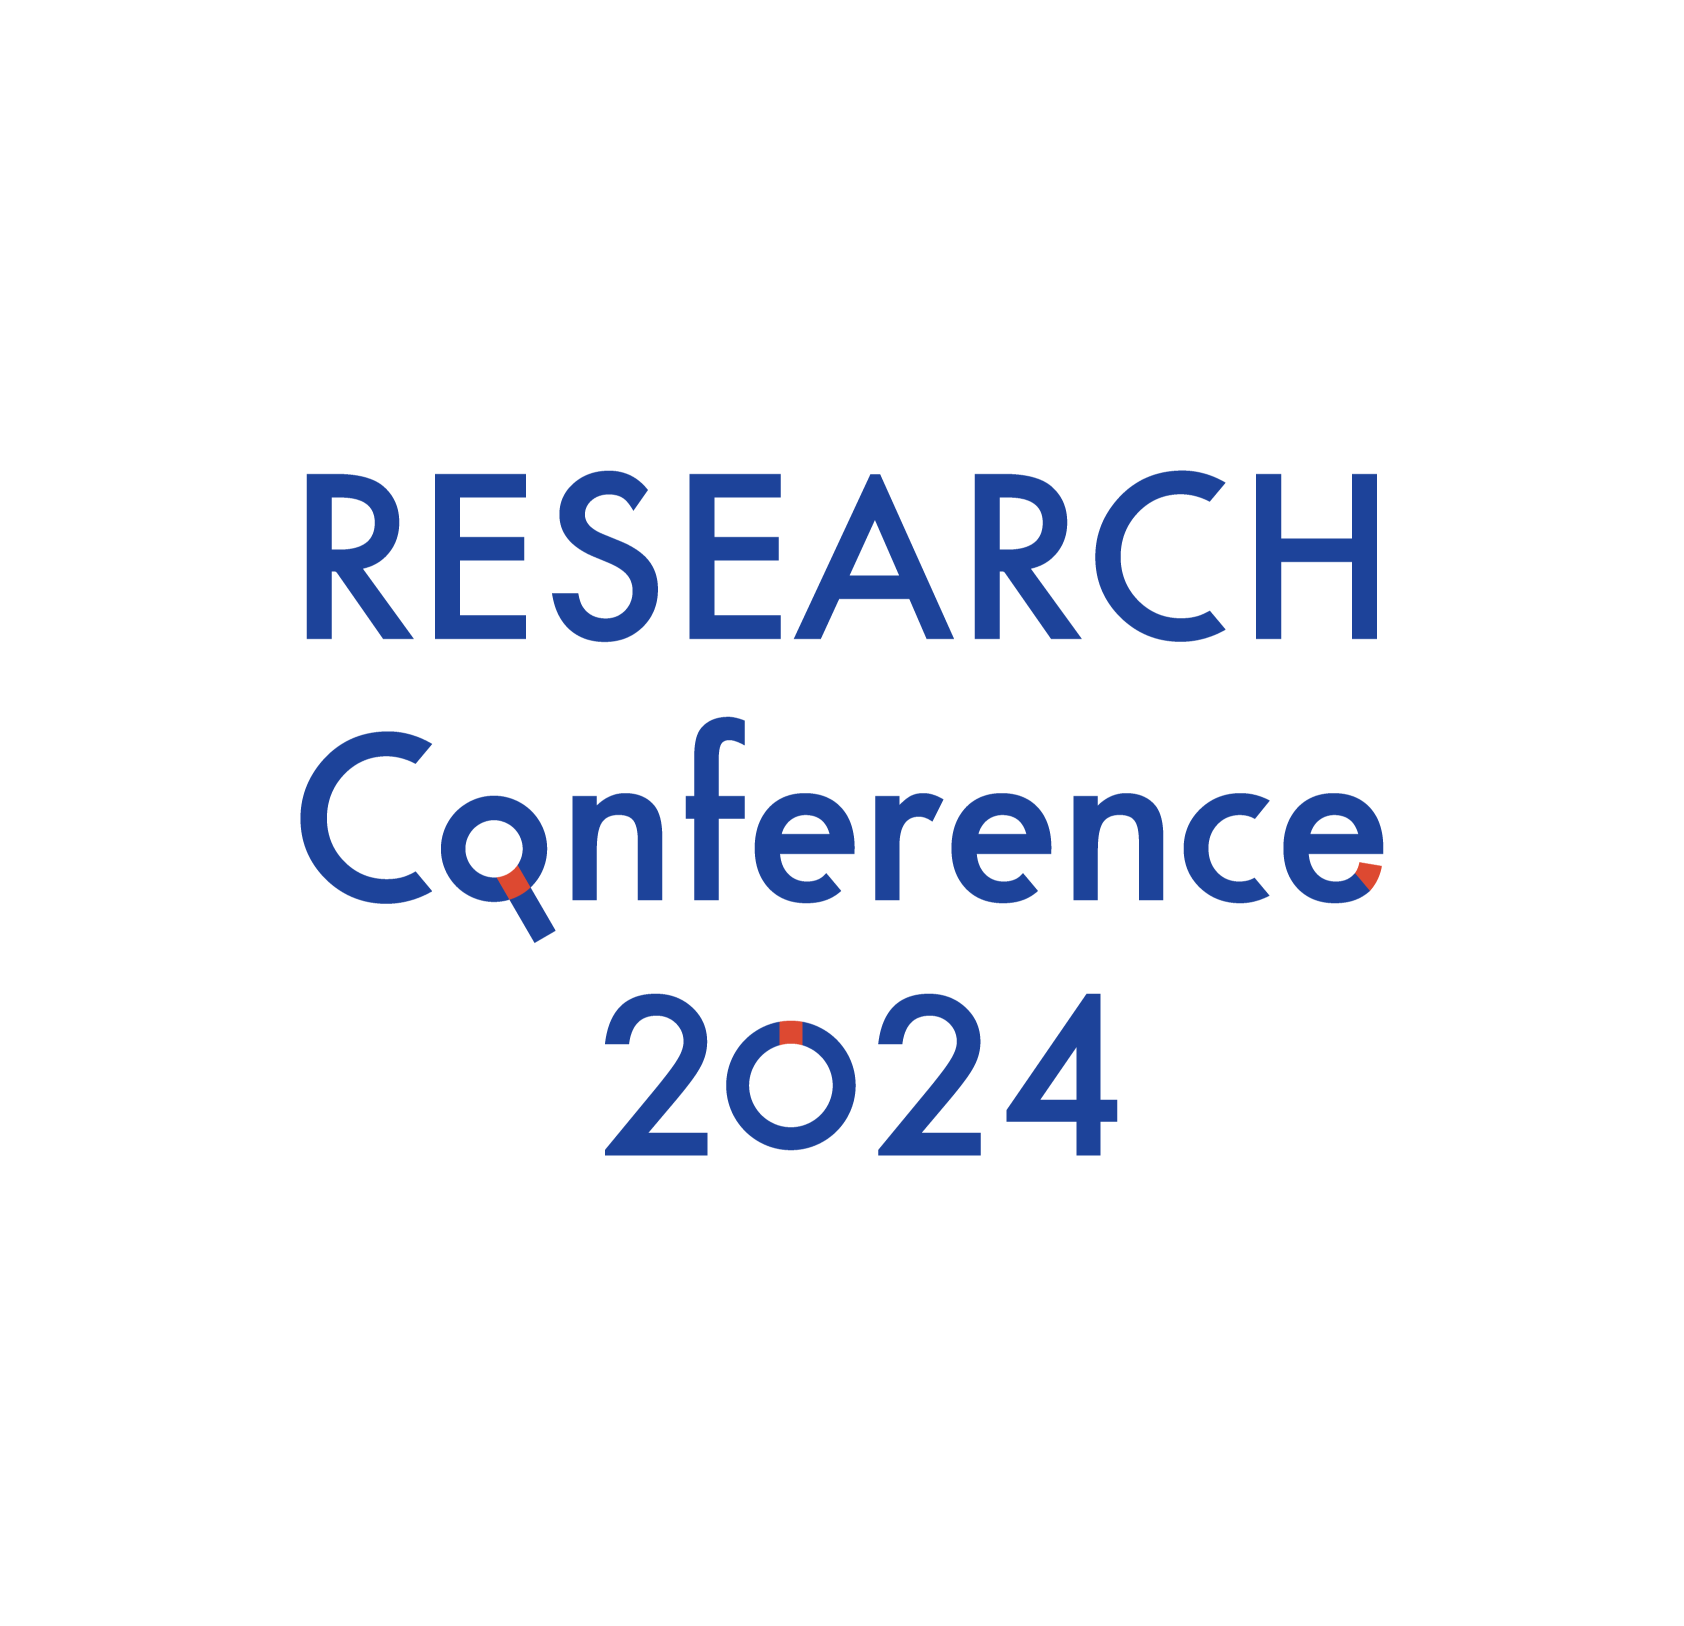 RESEARCH Conference 2024